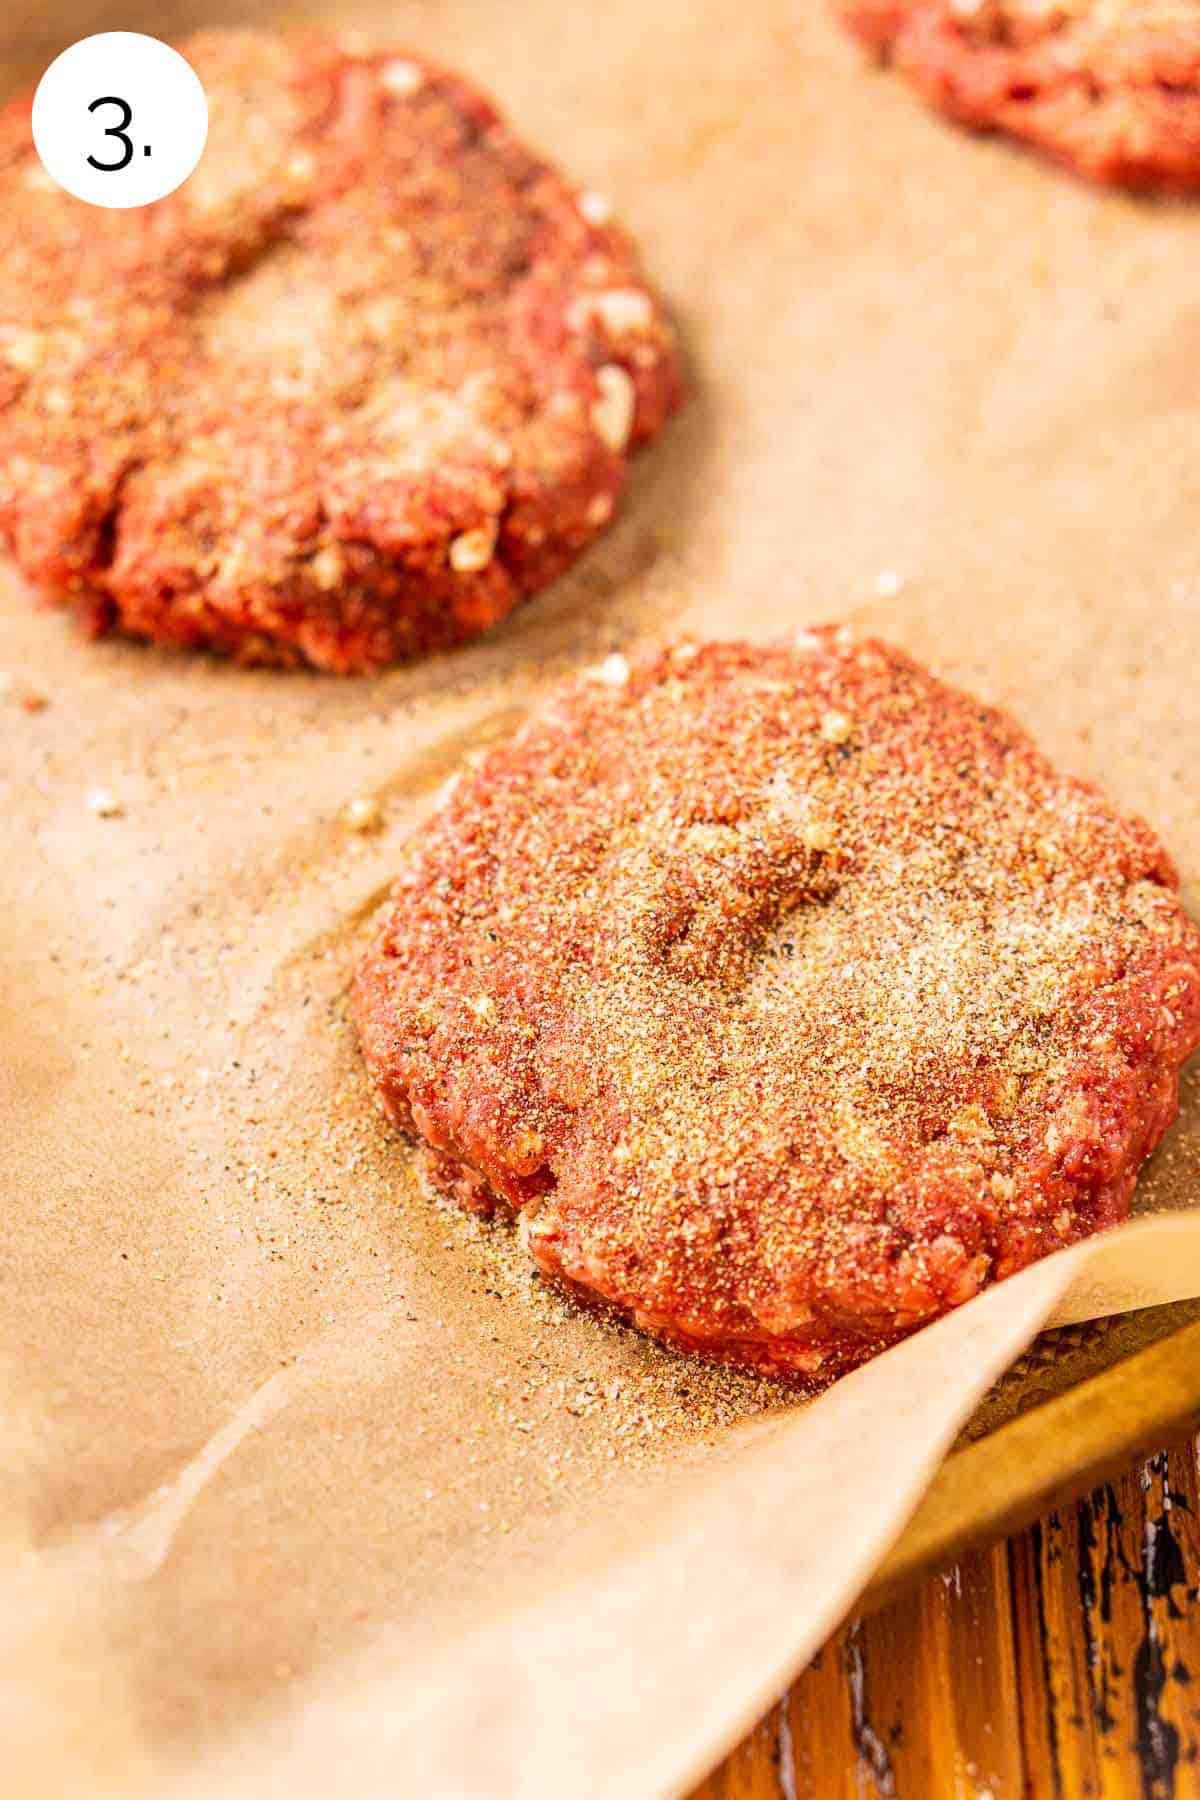 The burger patties on a parchment paper-lined baking sheet with seasoning on top before they go on the grill.